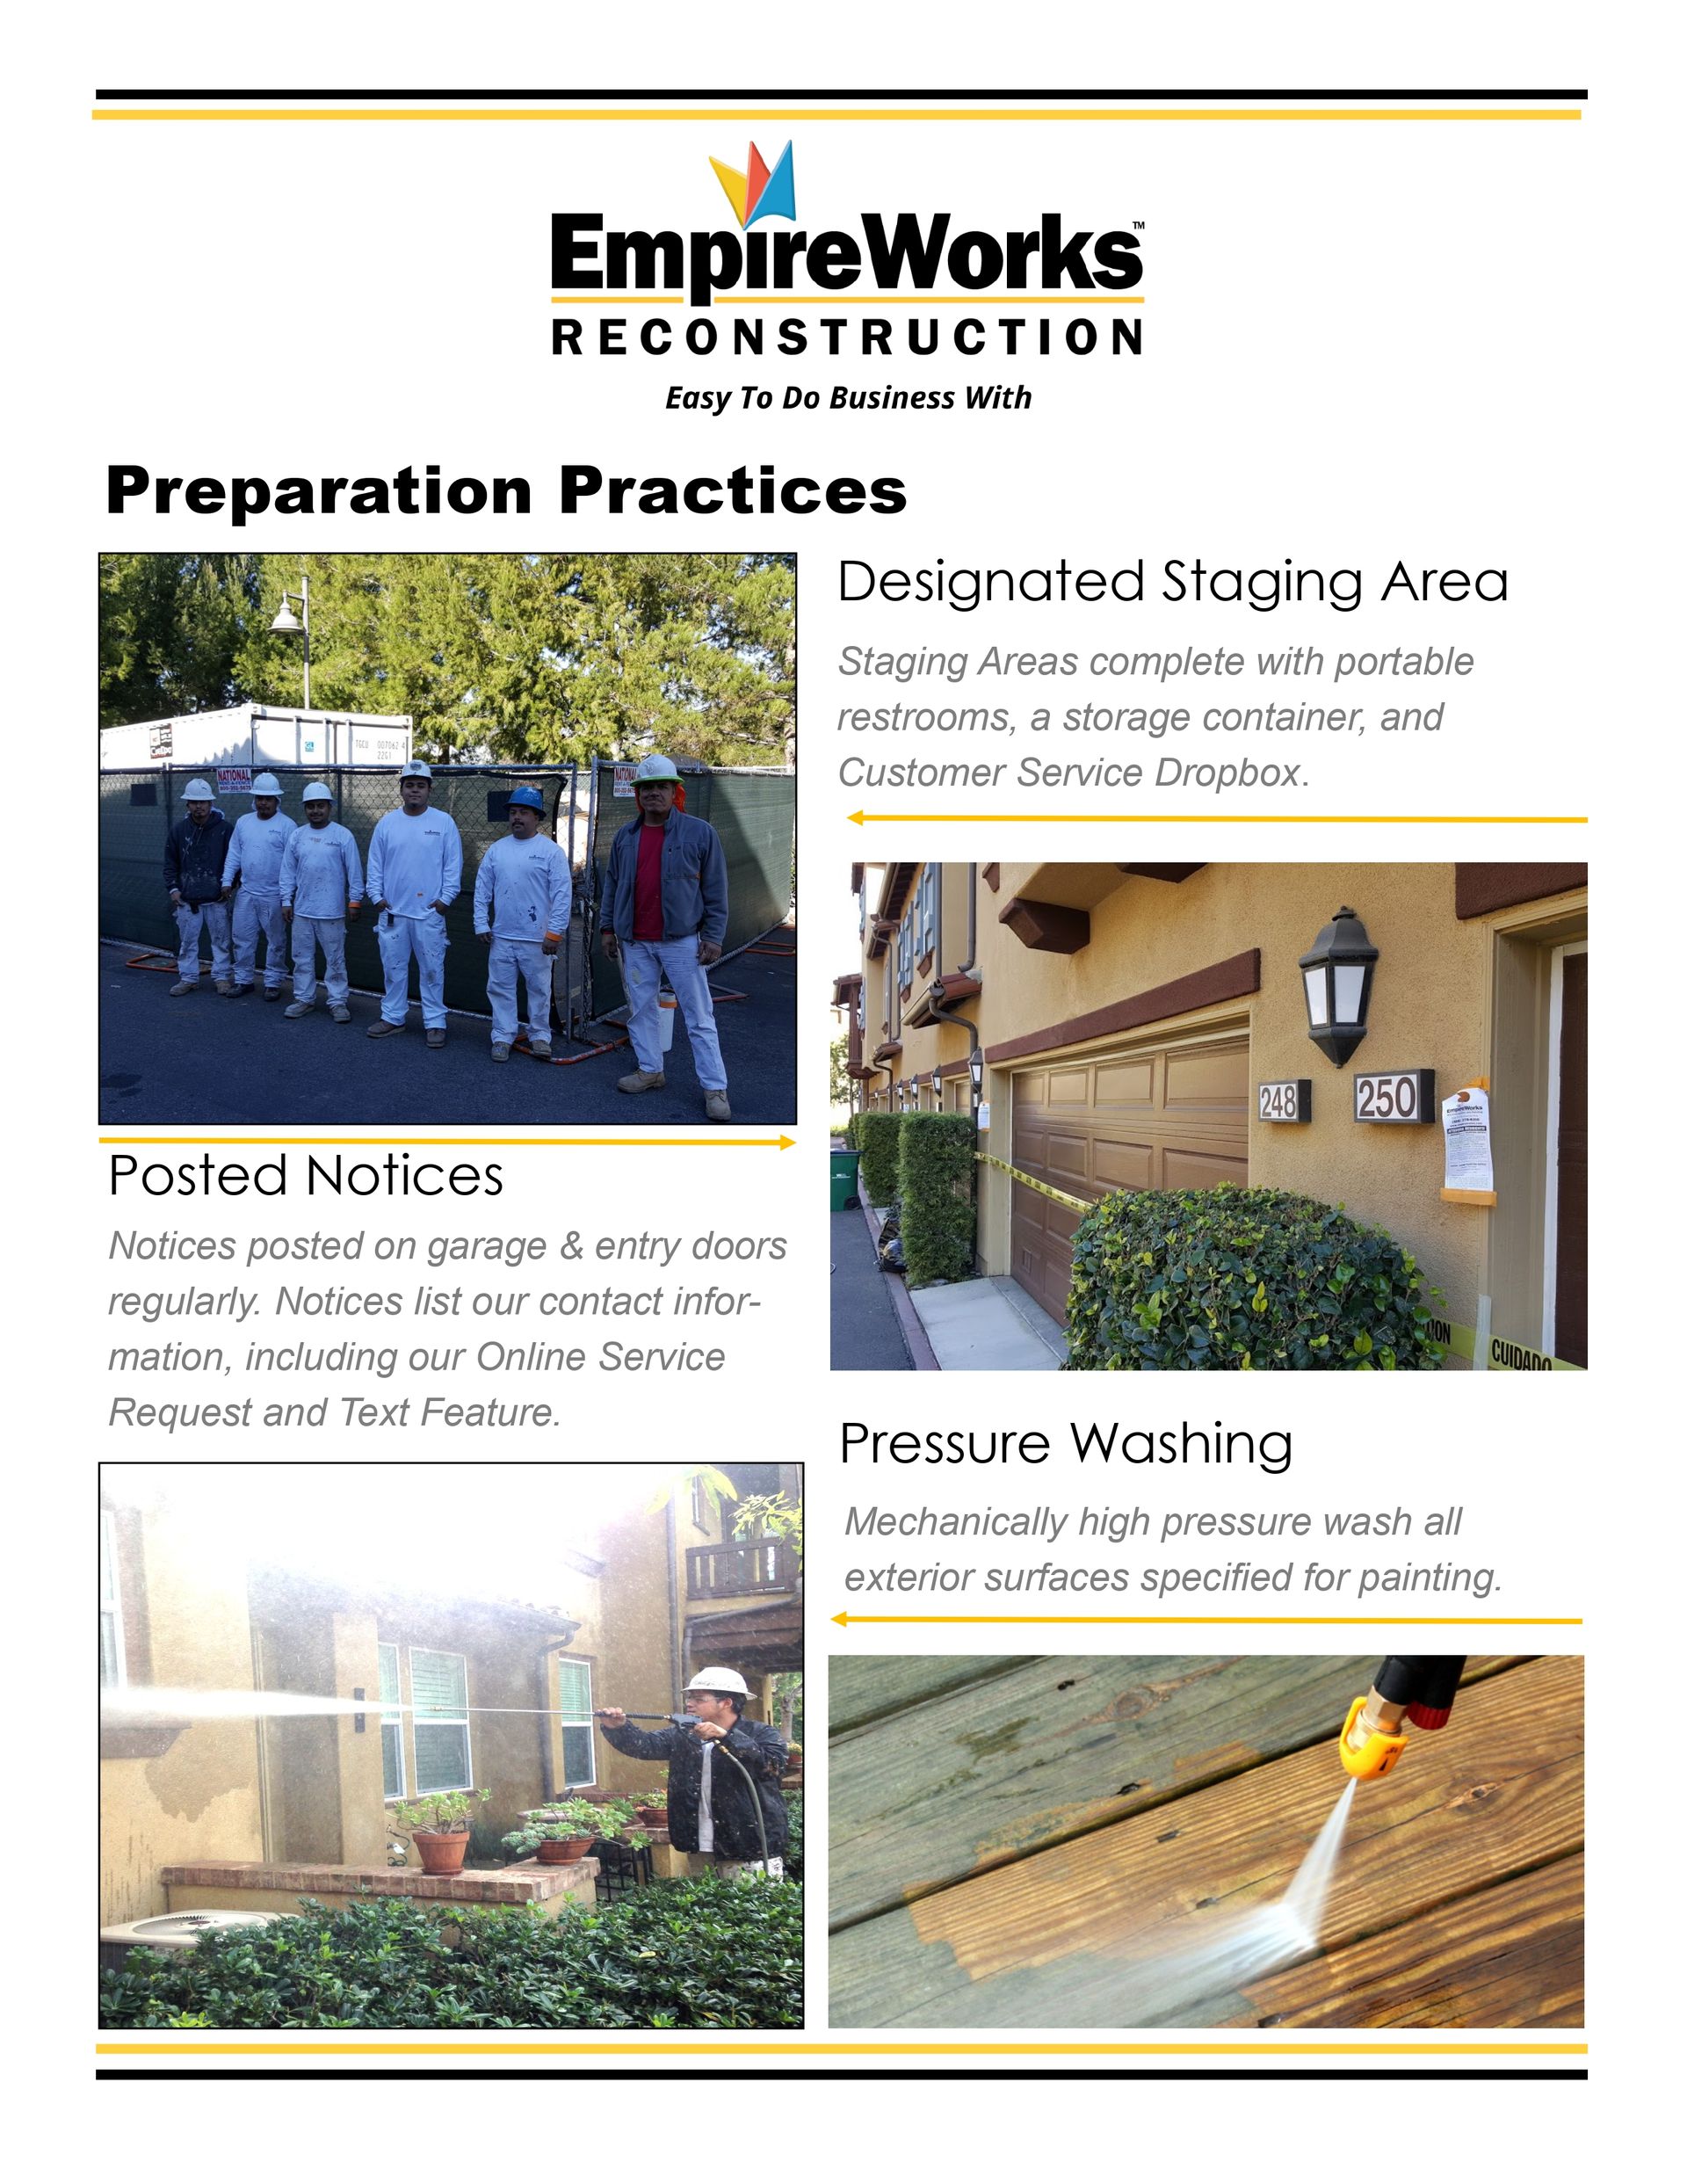 A brochure for empire works reconstruction shows preparation practices.